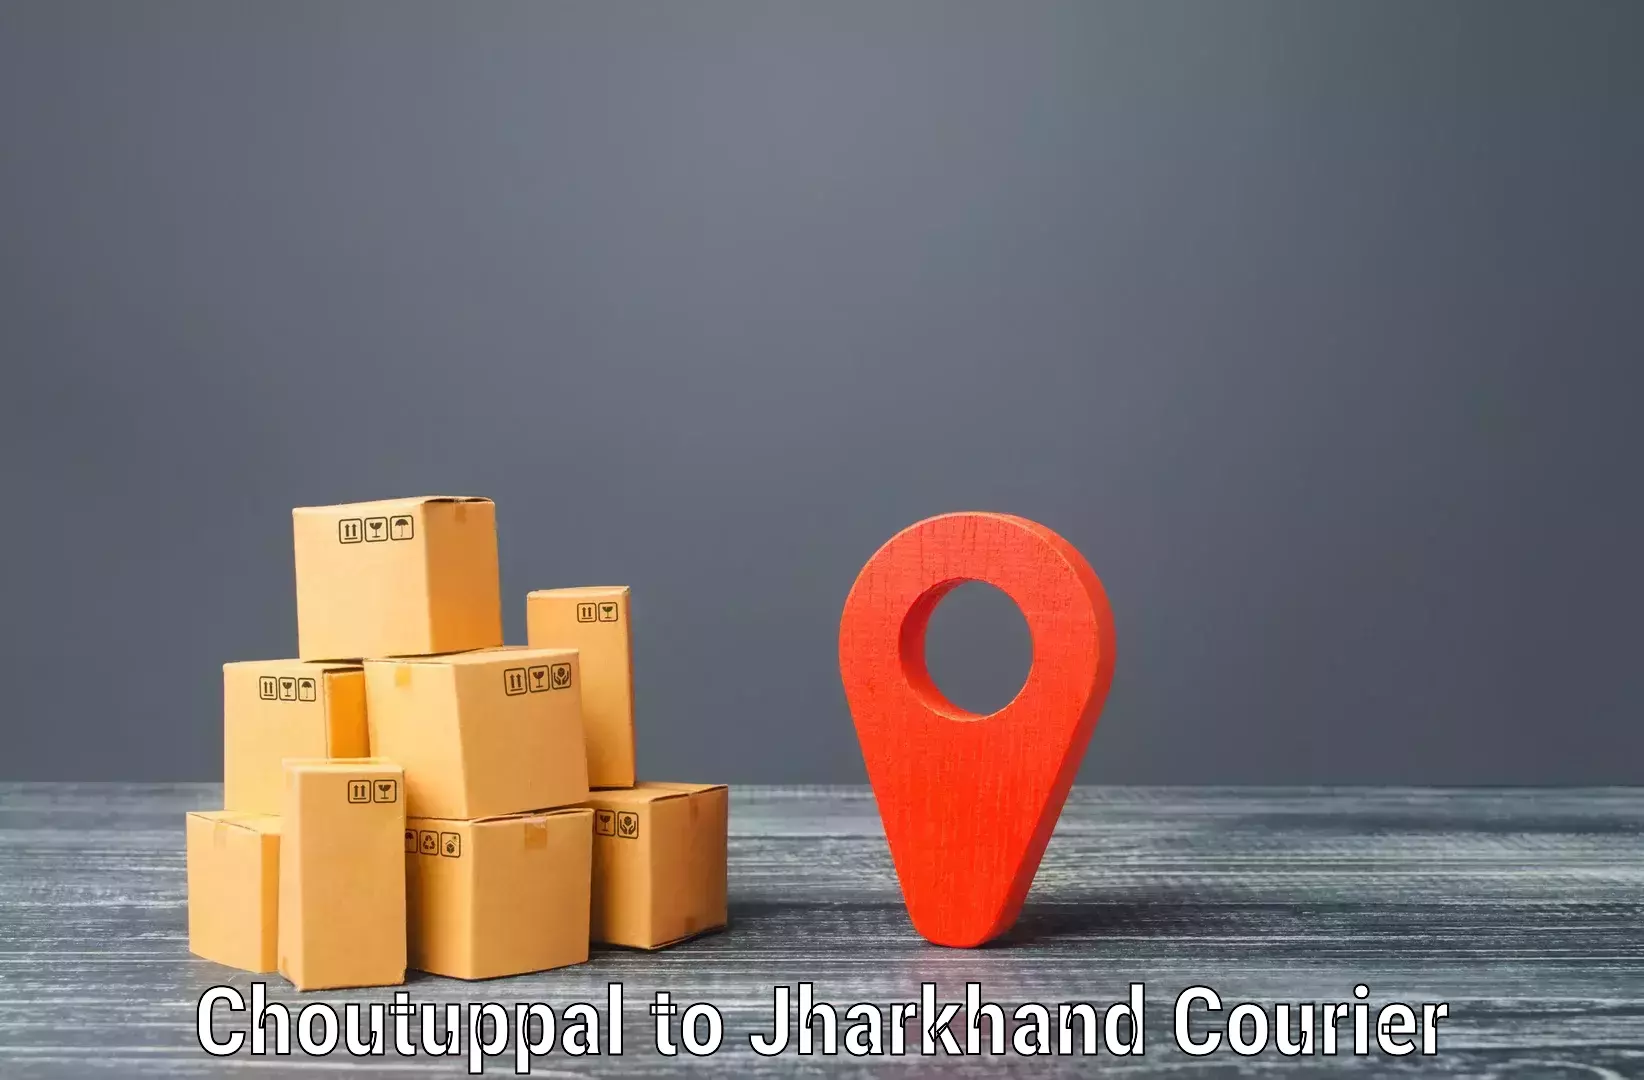 Seamless shipping experience in Choutuppal to Tisri